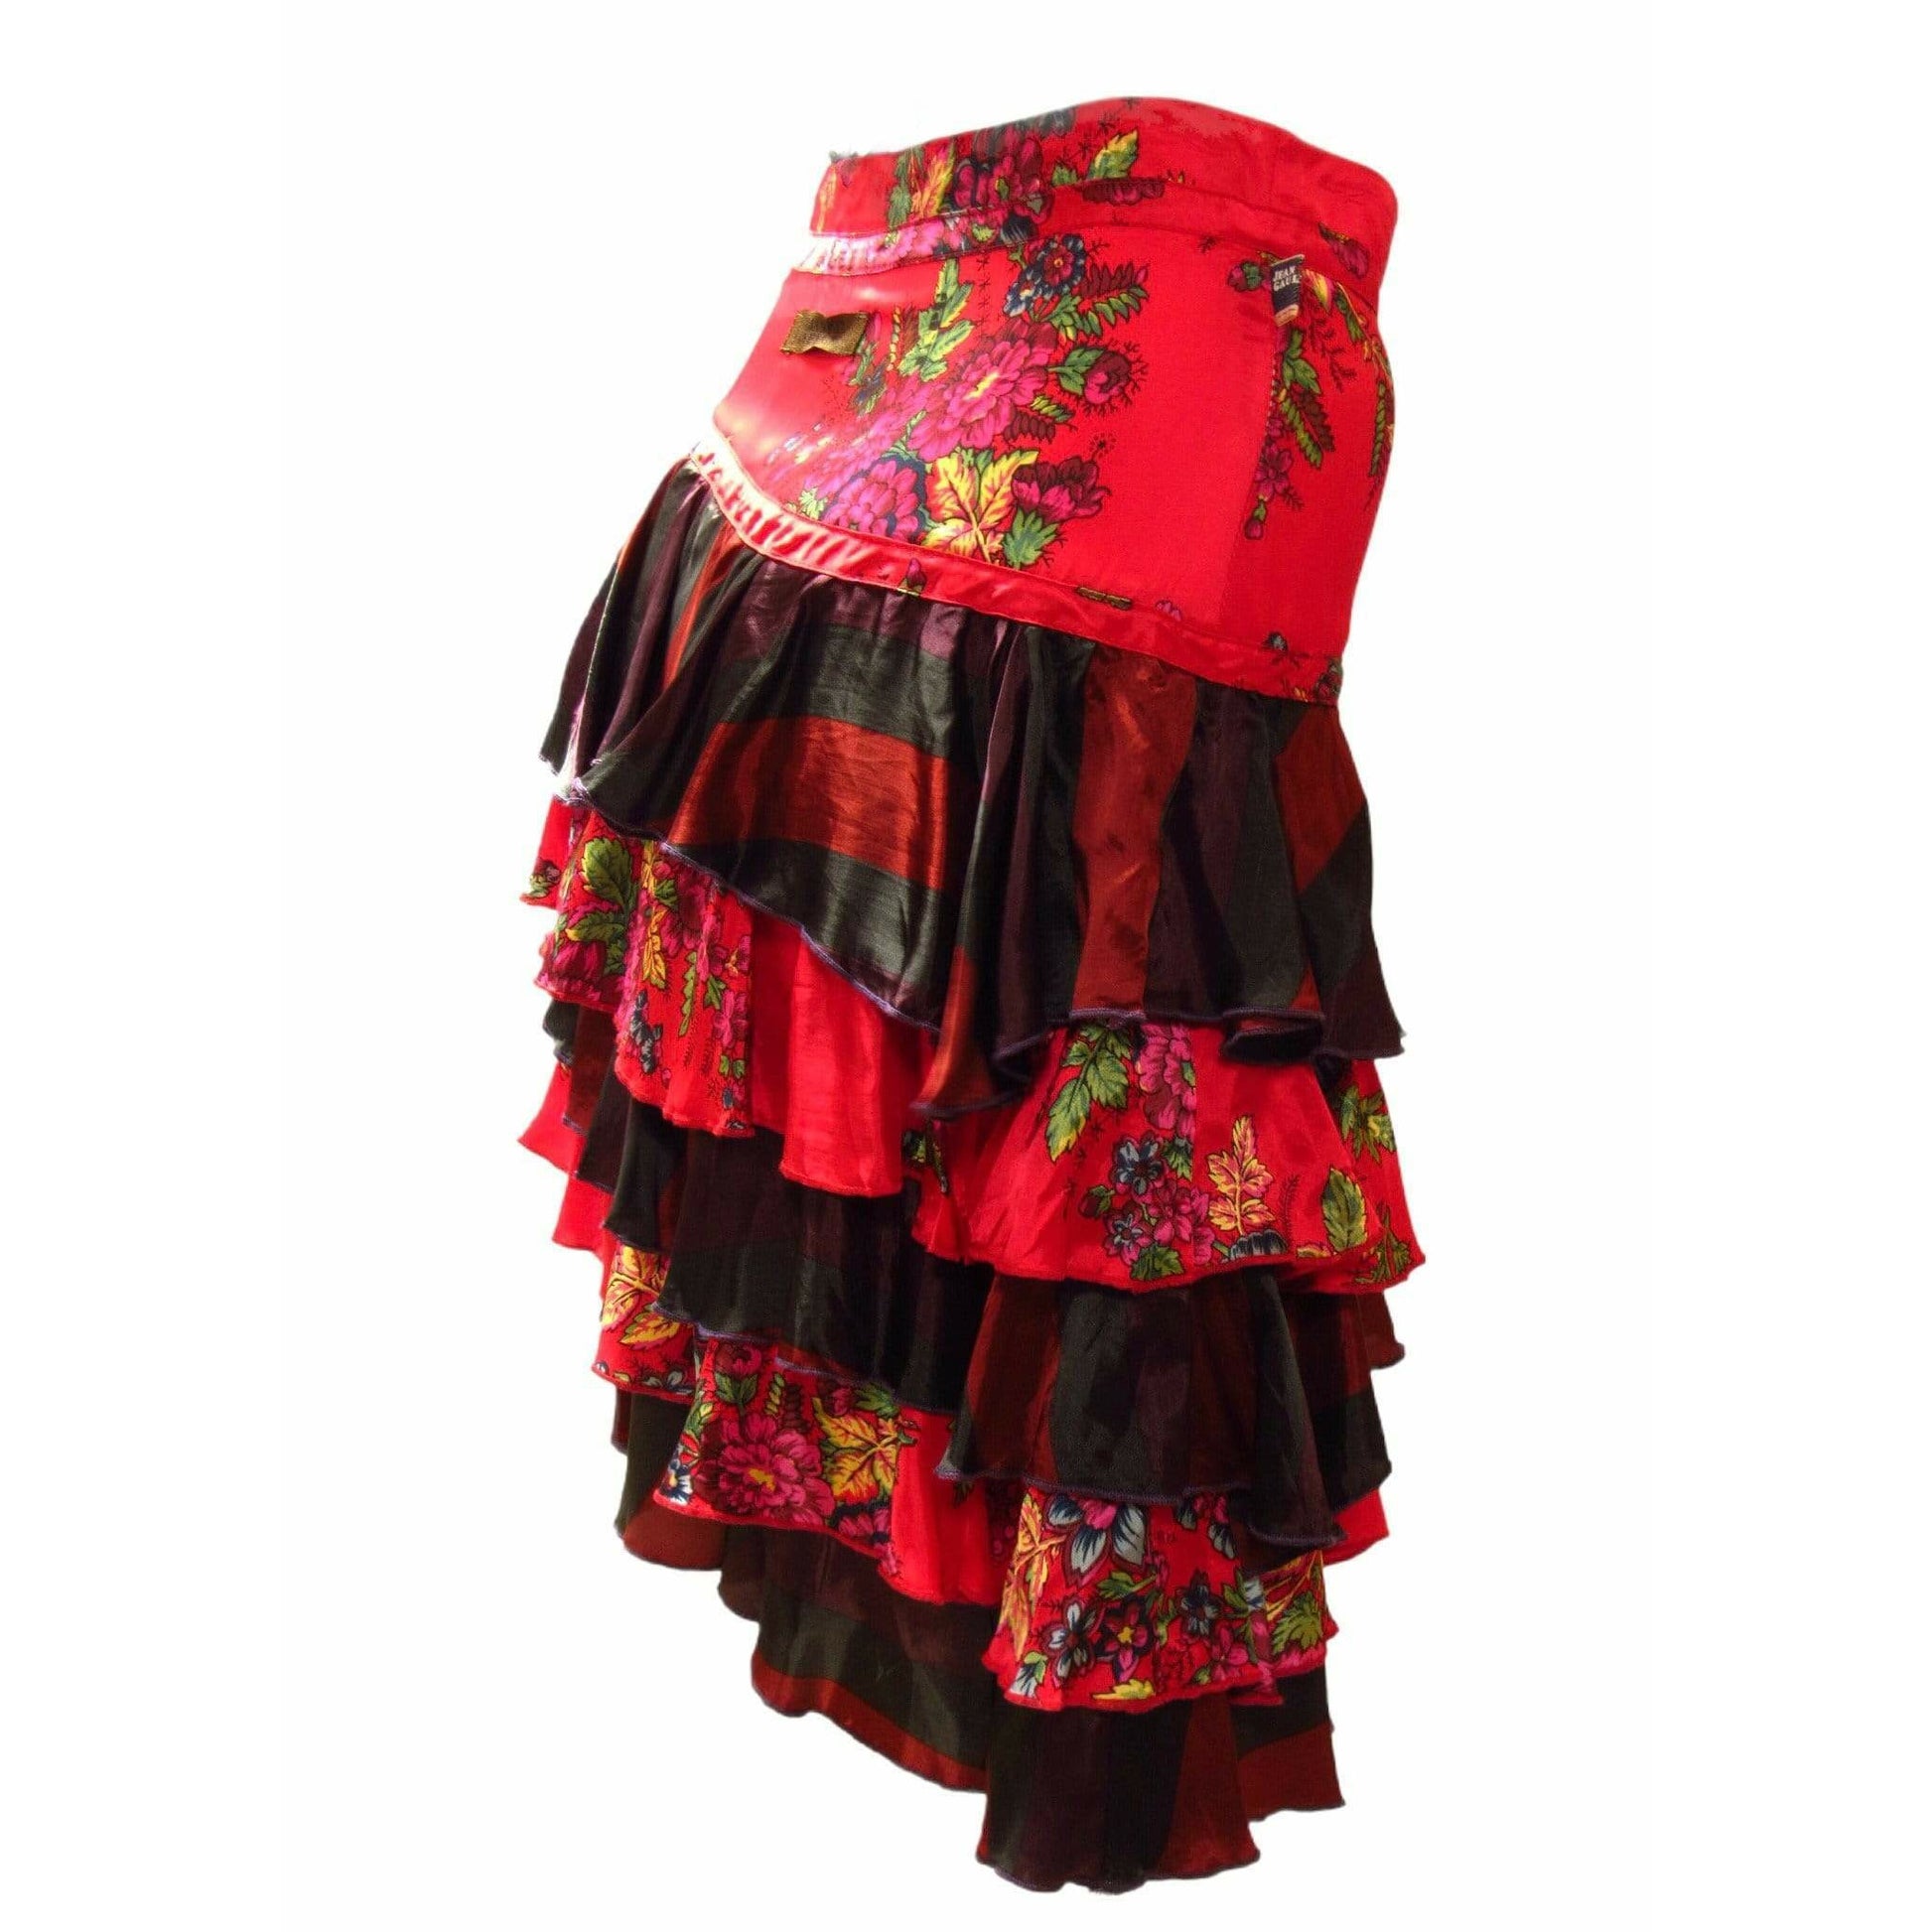 jean-paul-gaultier-floral-tiered-skirt Skirts Tomato